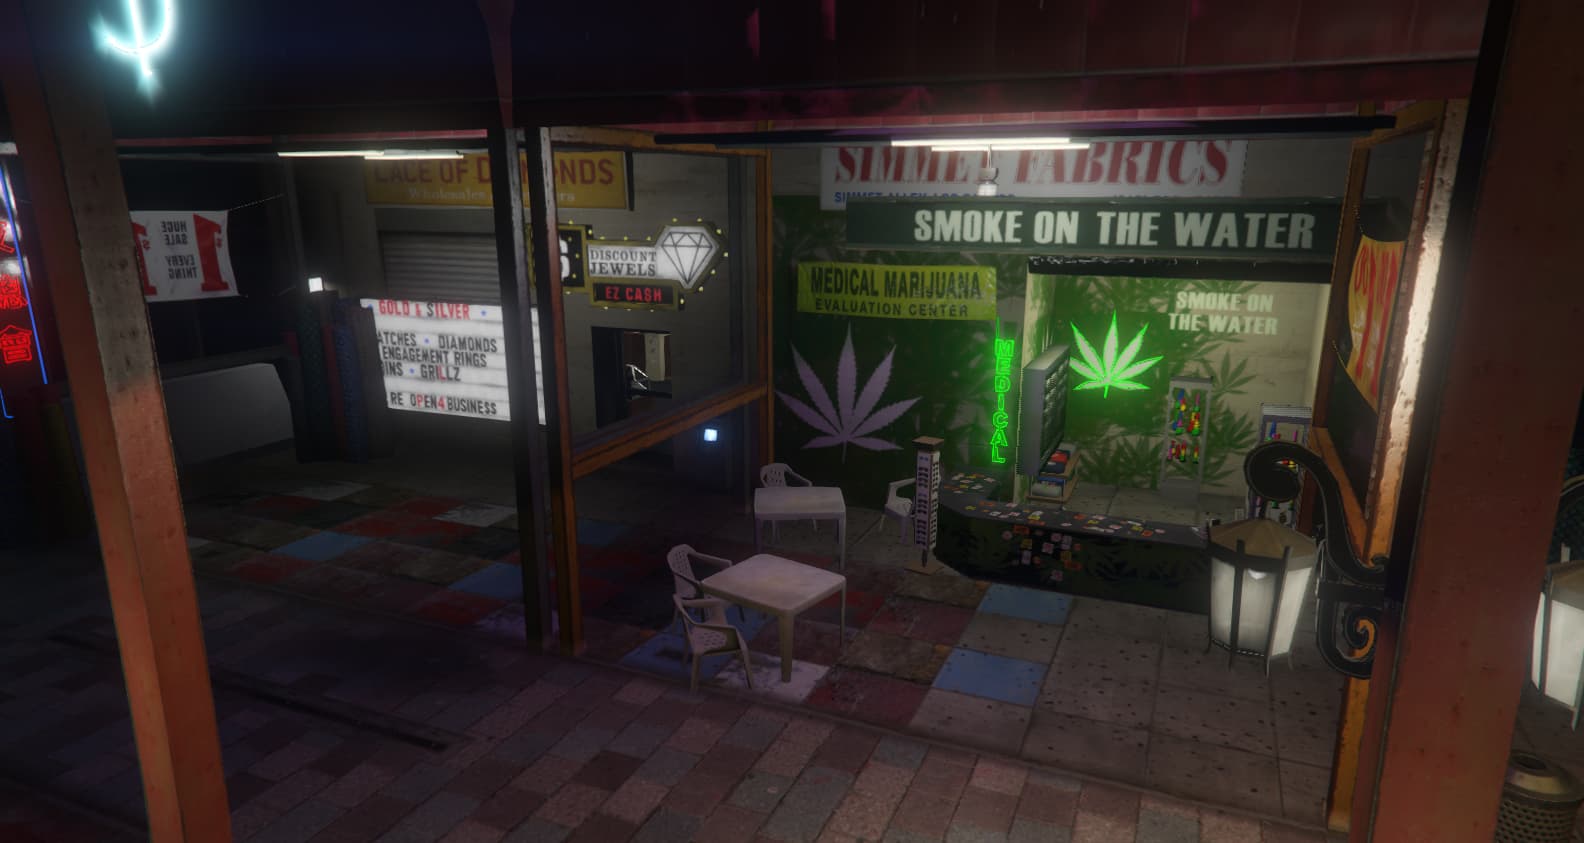 MLO] Pawn Shop Pack [3 Locations] - Releases - Cfx.re Community